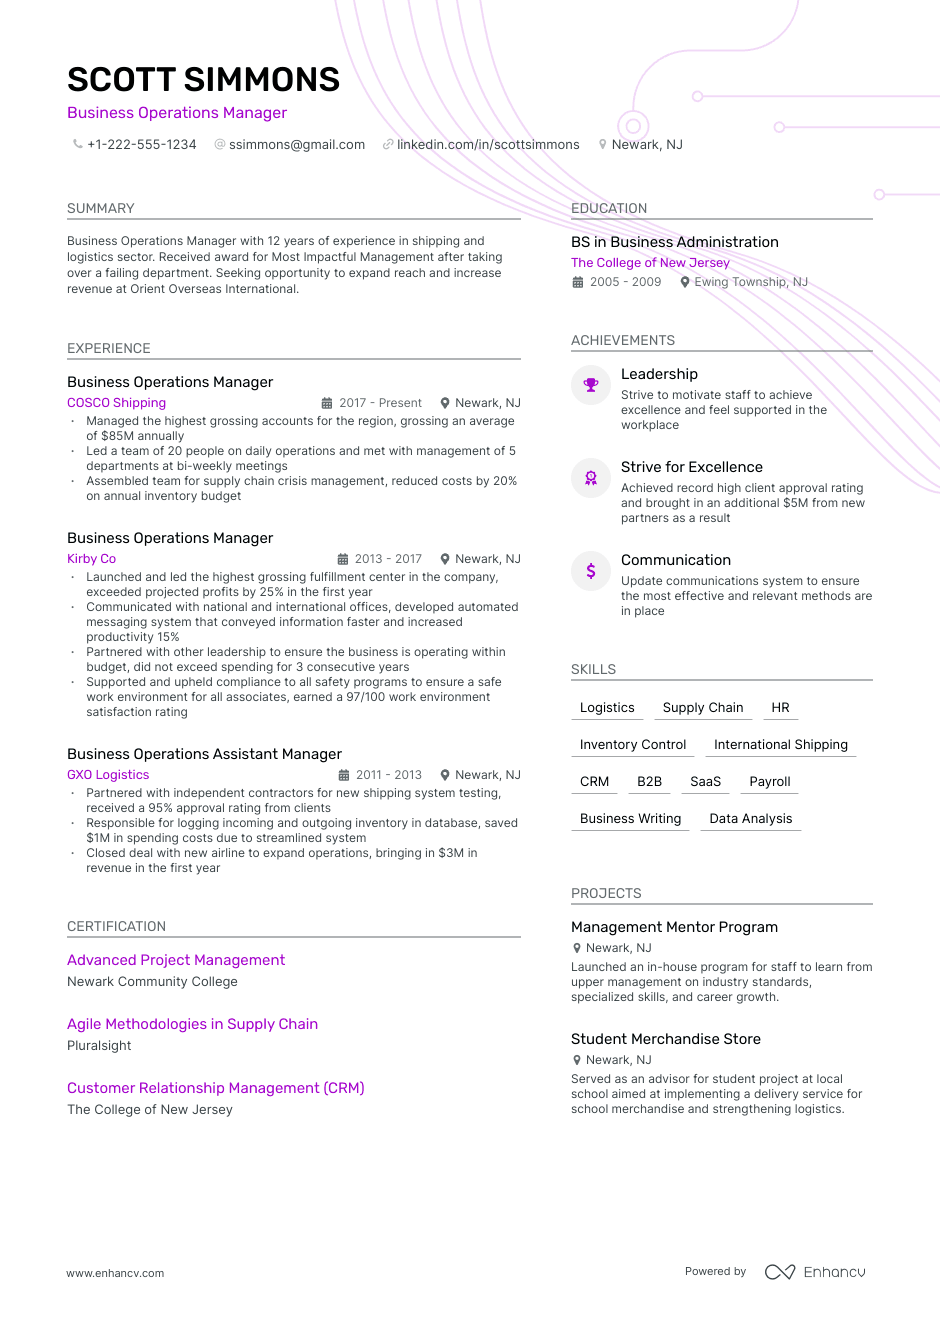 Business operations manager resume example